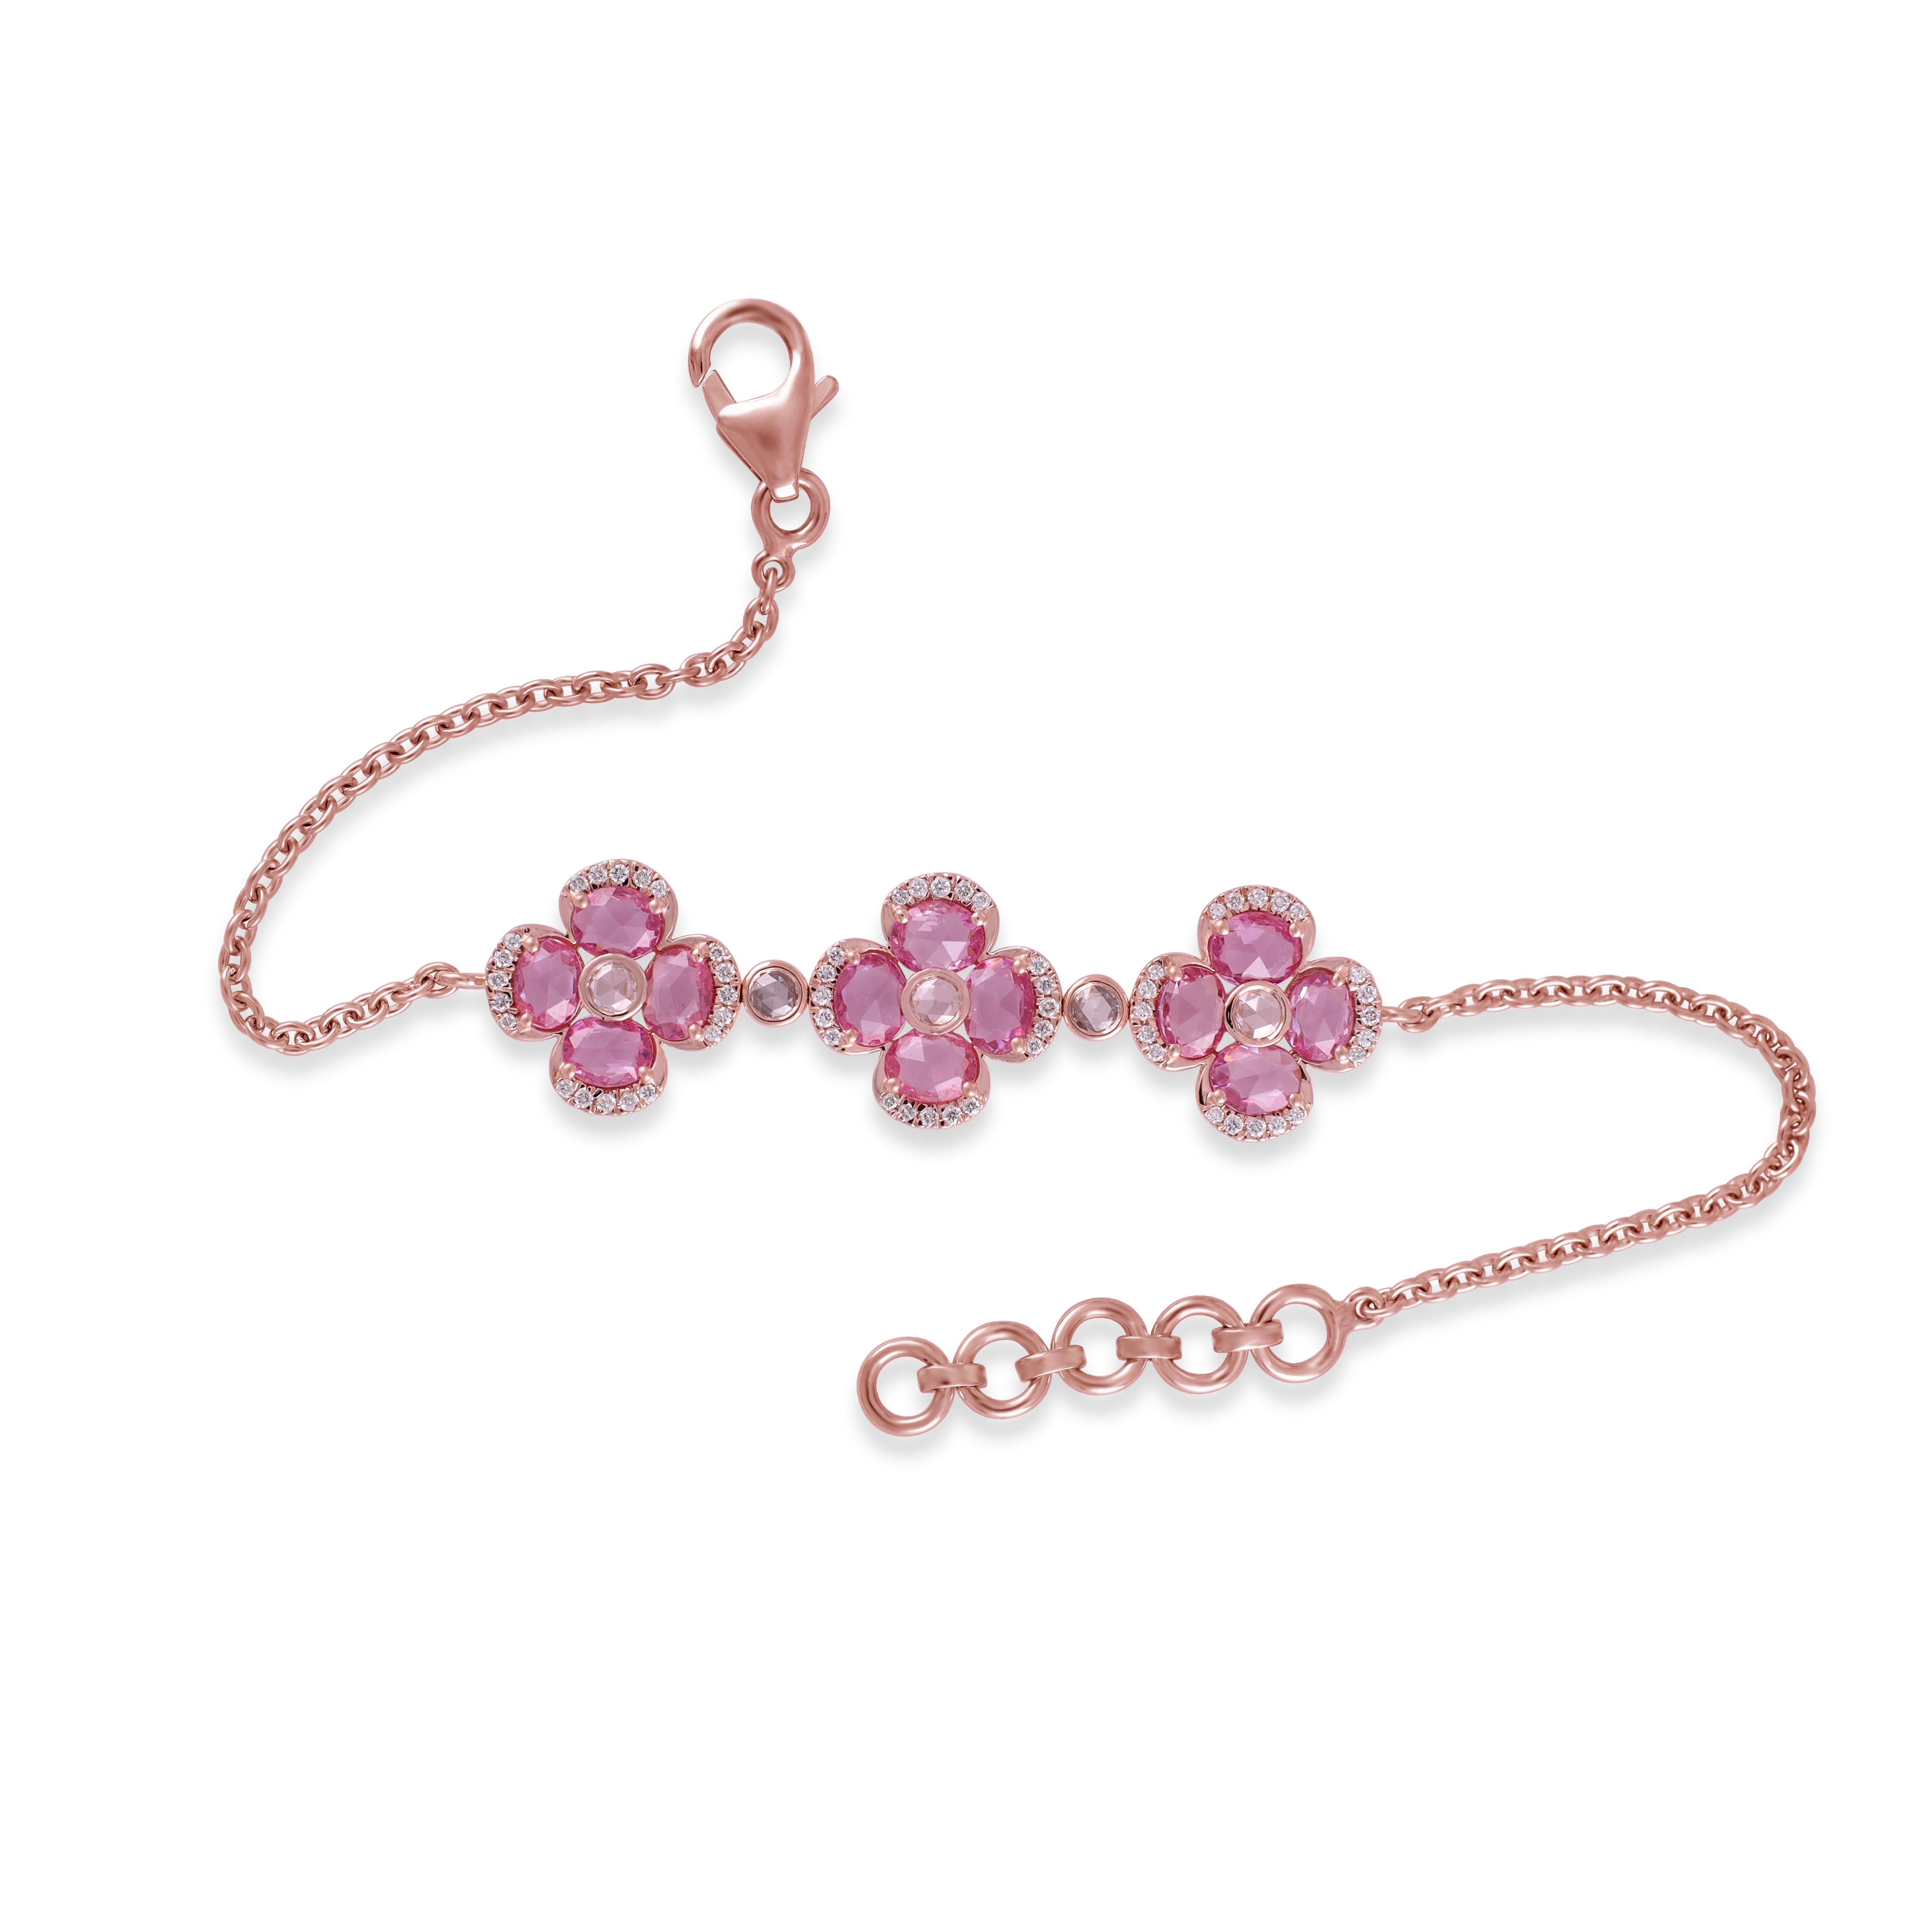 2.74 Carat Pink Sapphire
 and Diamond  Bracelet in 18K Rose Gold

This magnificent Oval shape Pink Sapphire Flower Bracelet is incredulous. The solitaire Oval-shaped Oval-cut sapphires are beautifully With Single Rose cut Diamonds & Small Diamond